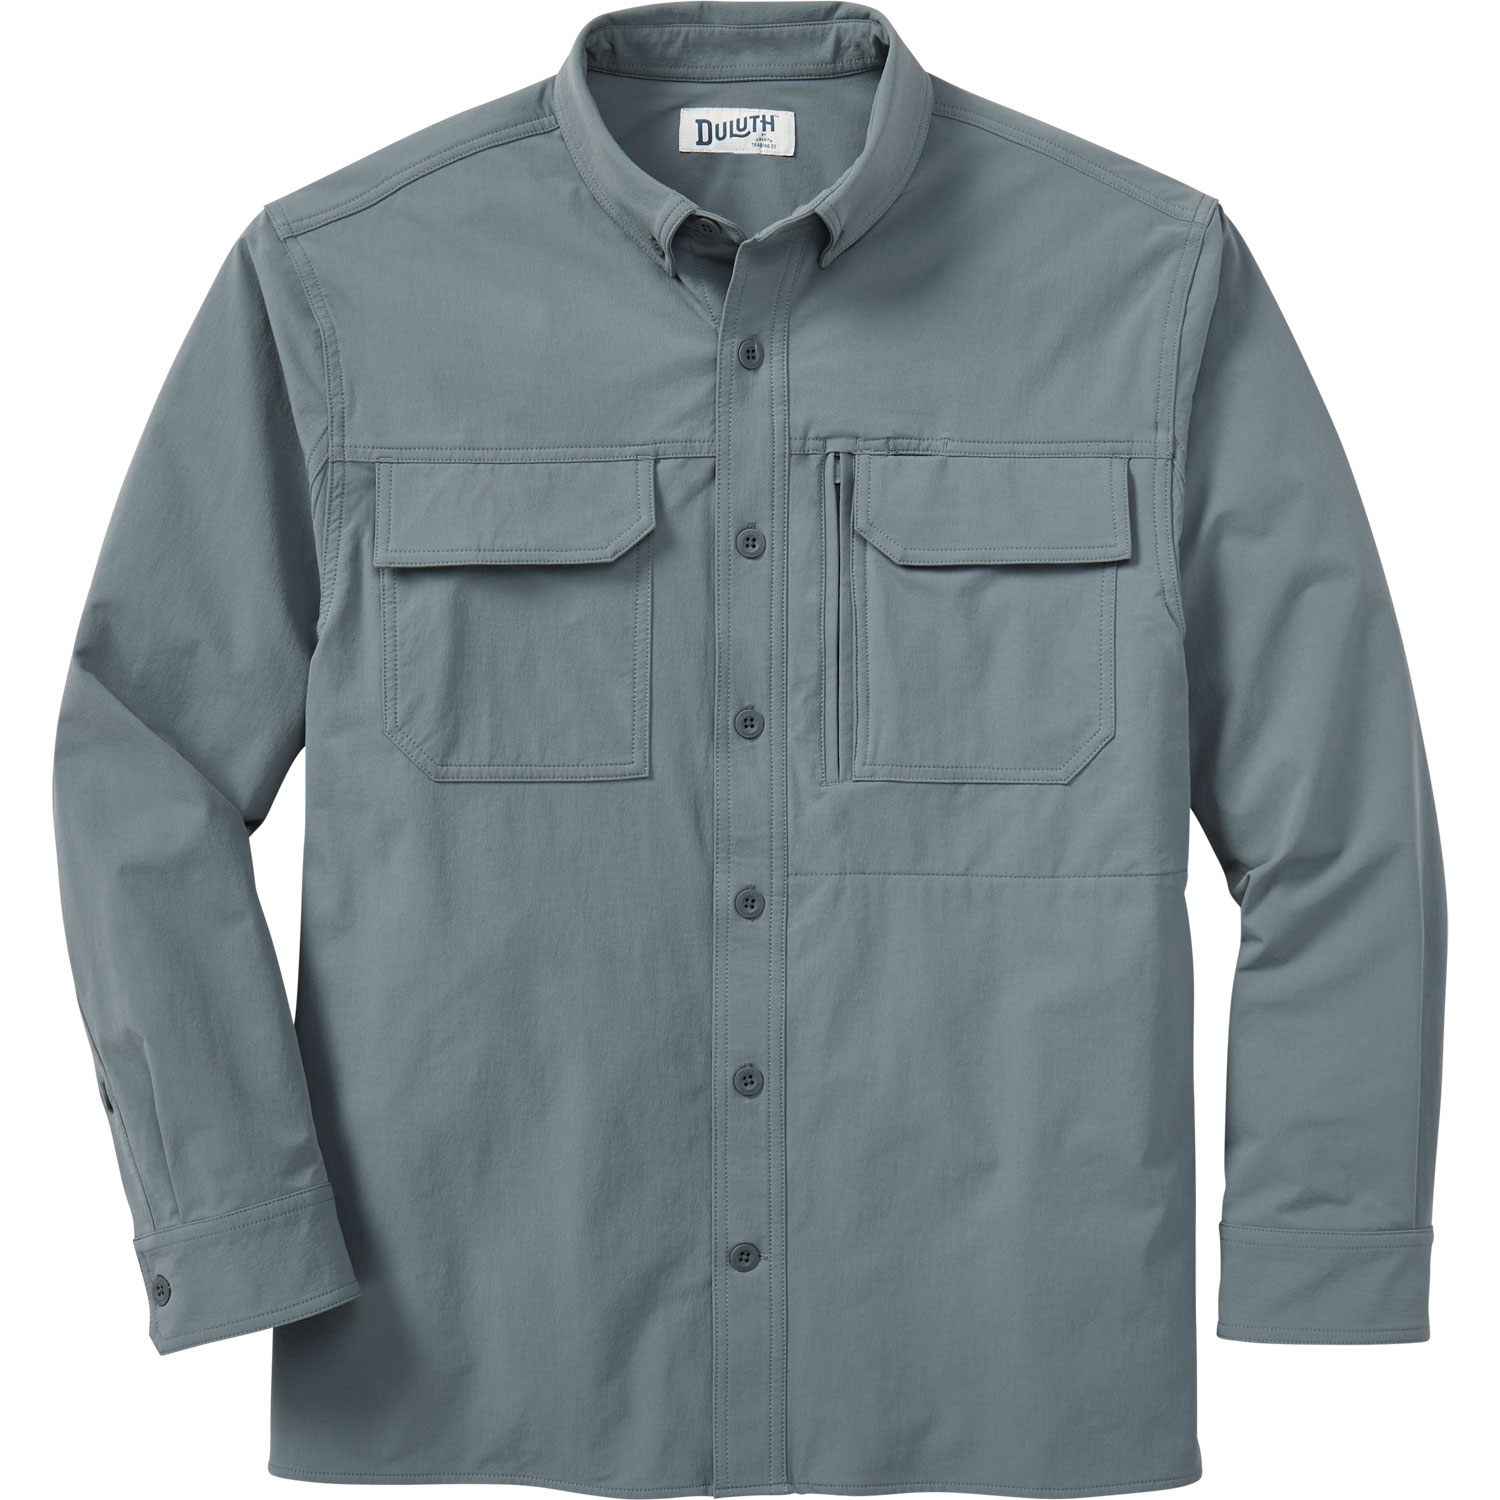 Duluth Trading Co. Men's Flexpedition Relaxed Fit Long Sleeve